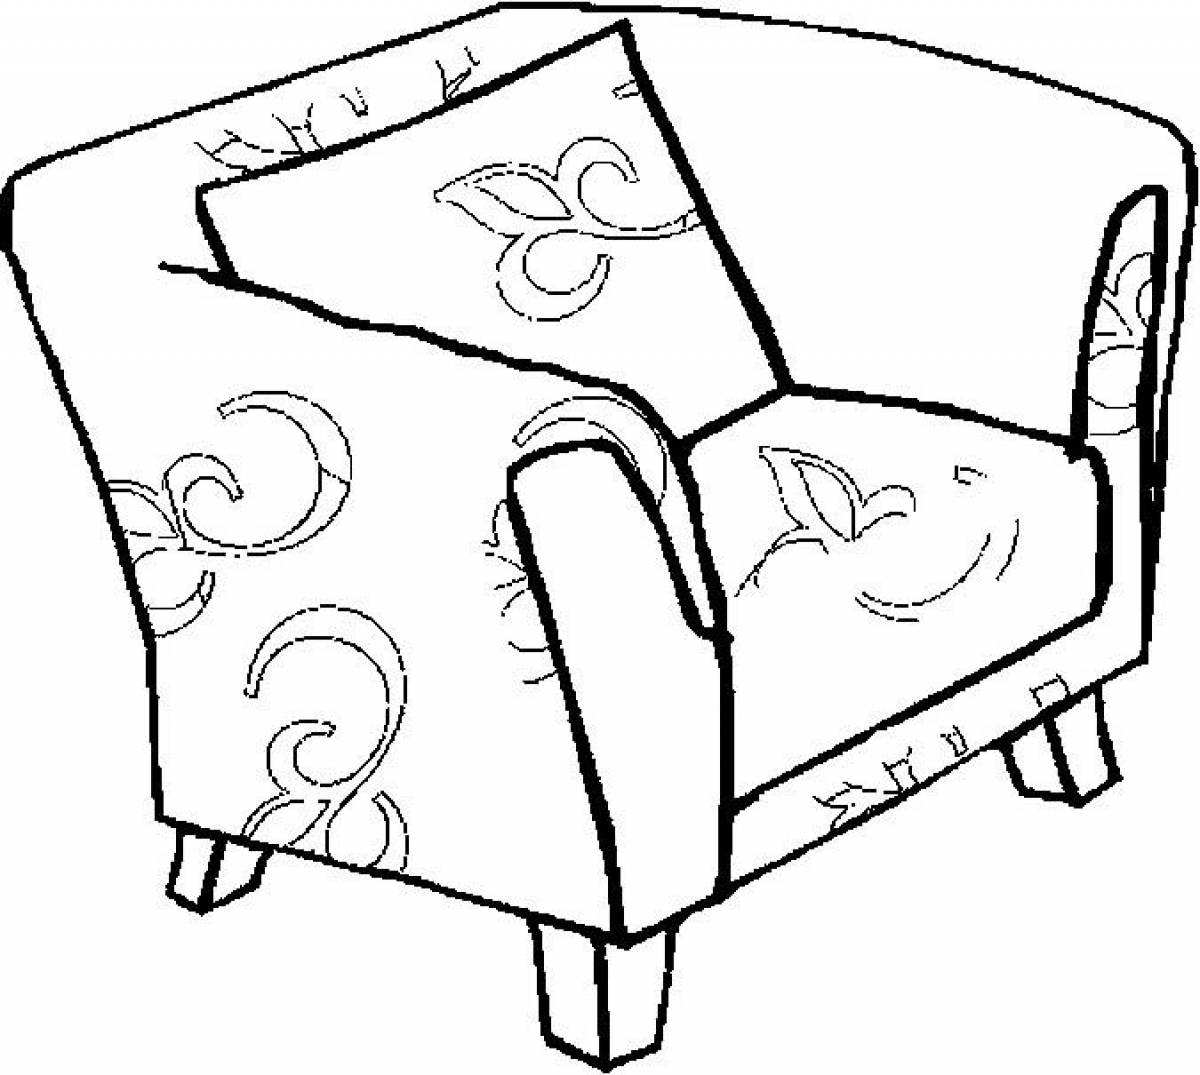 Armchair with patterns